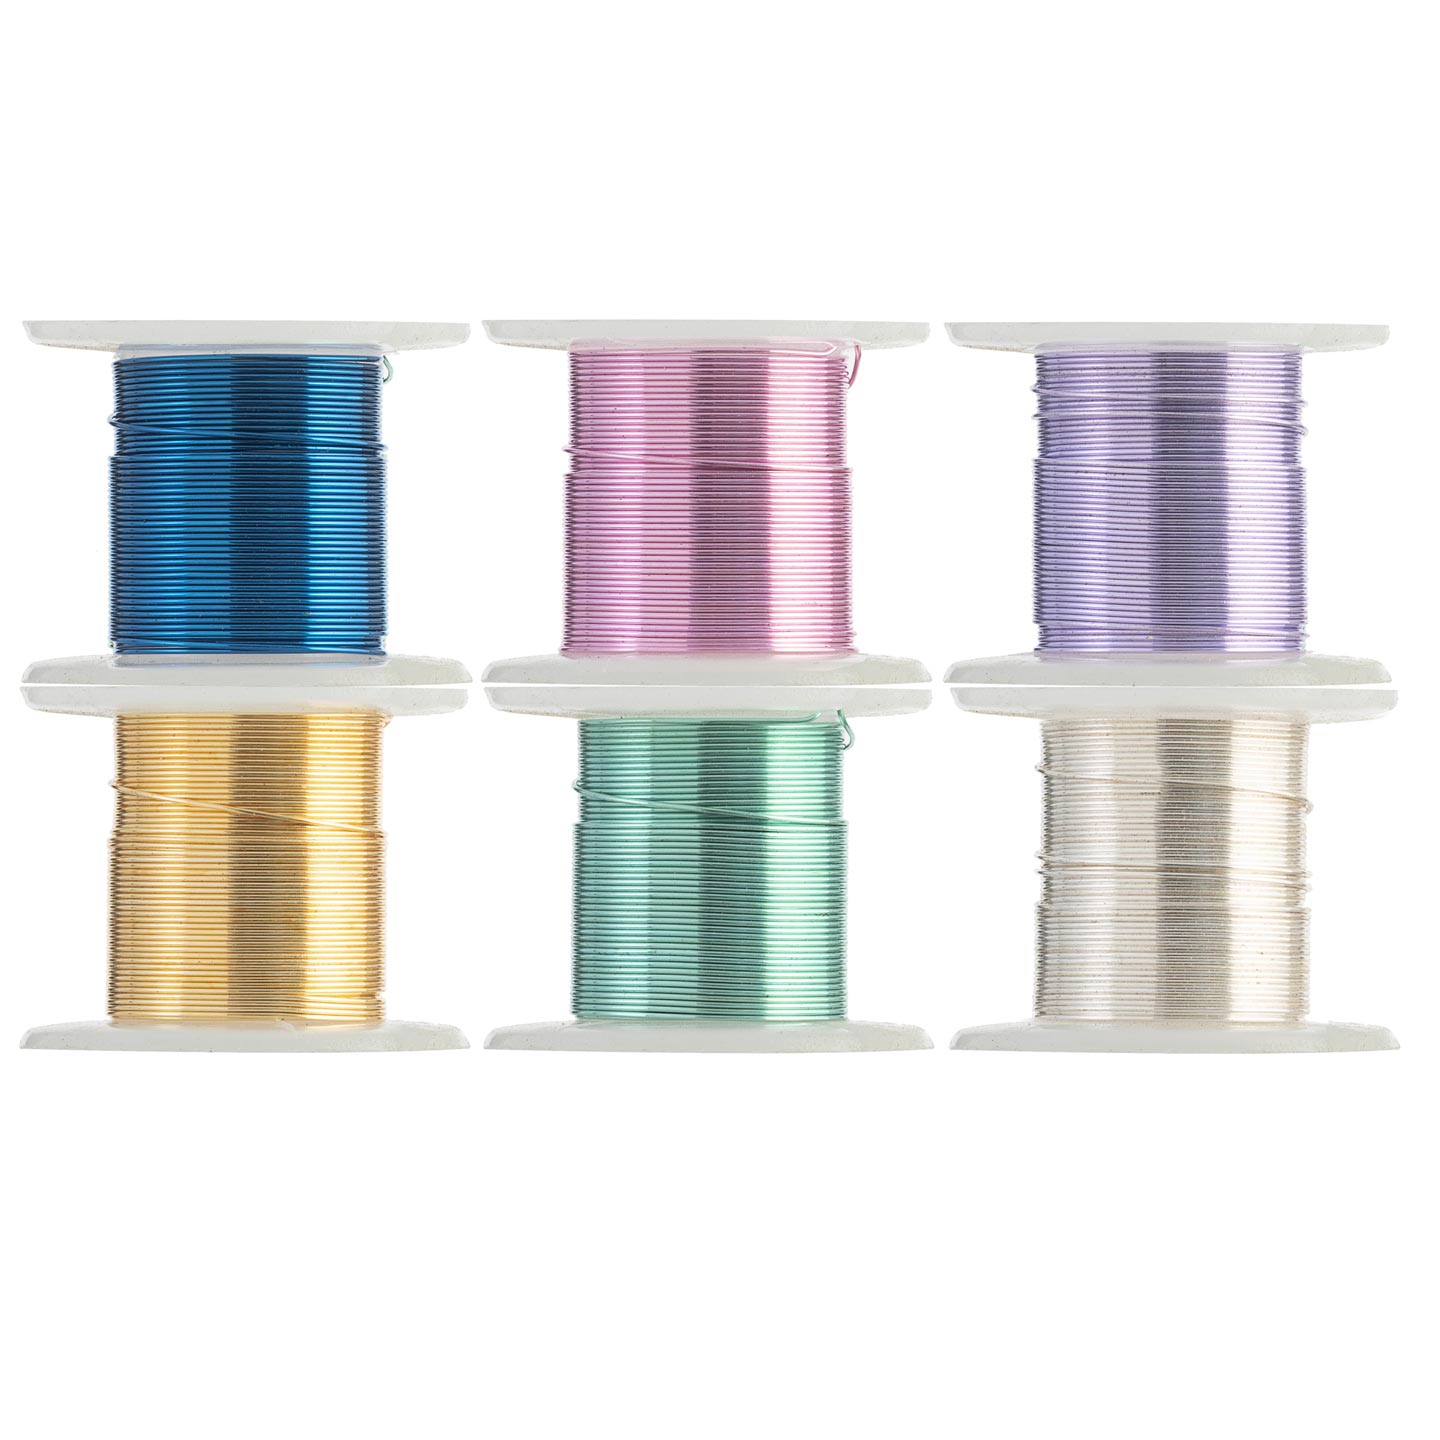 Beading Wire - Crafting Wire - Jewelry Making Wire